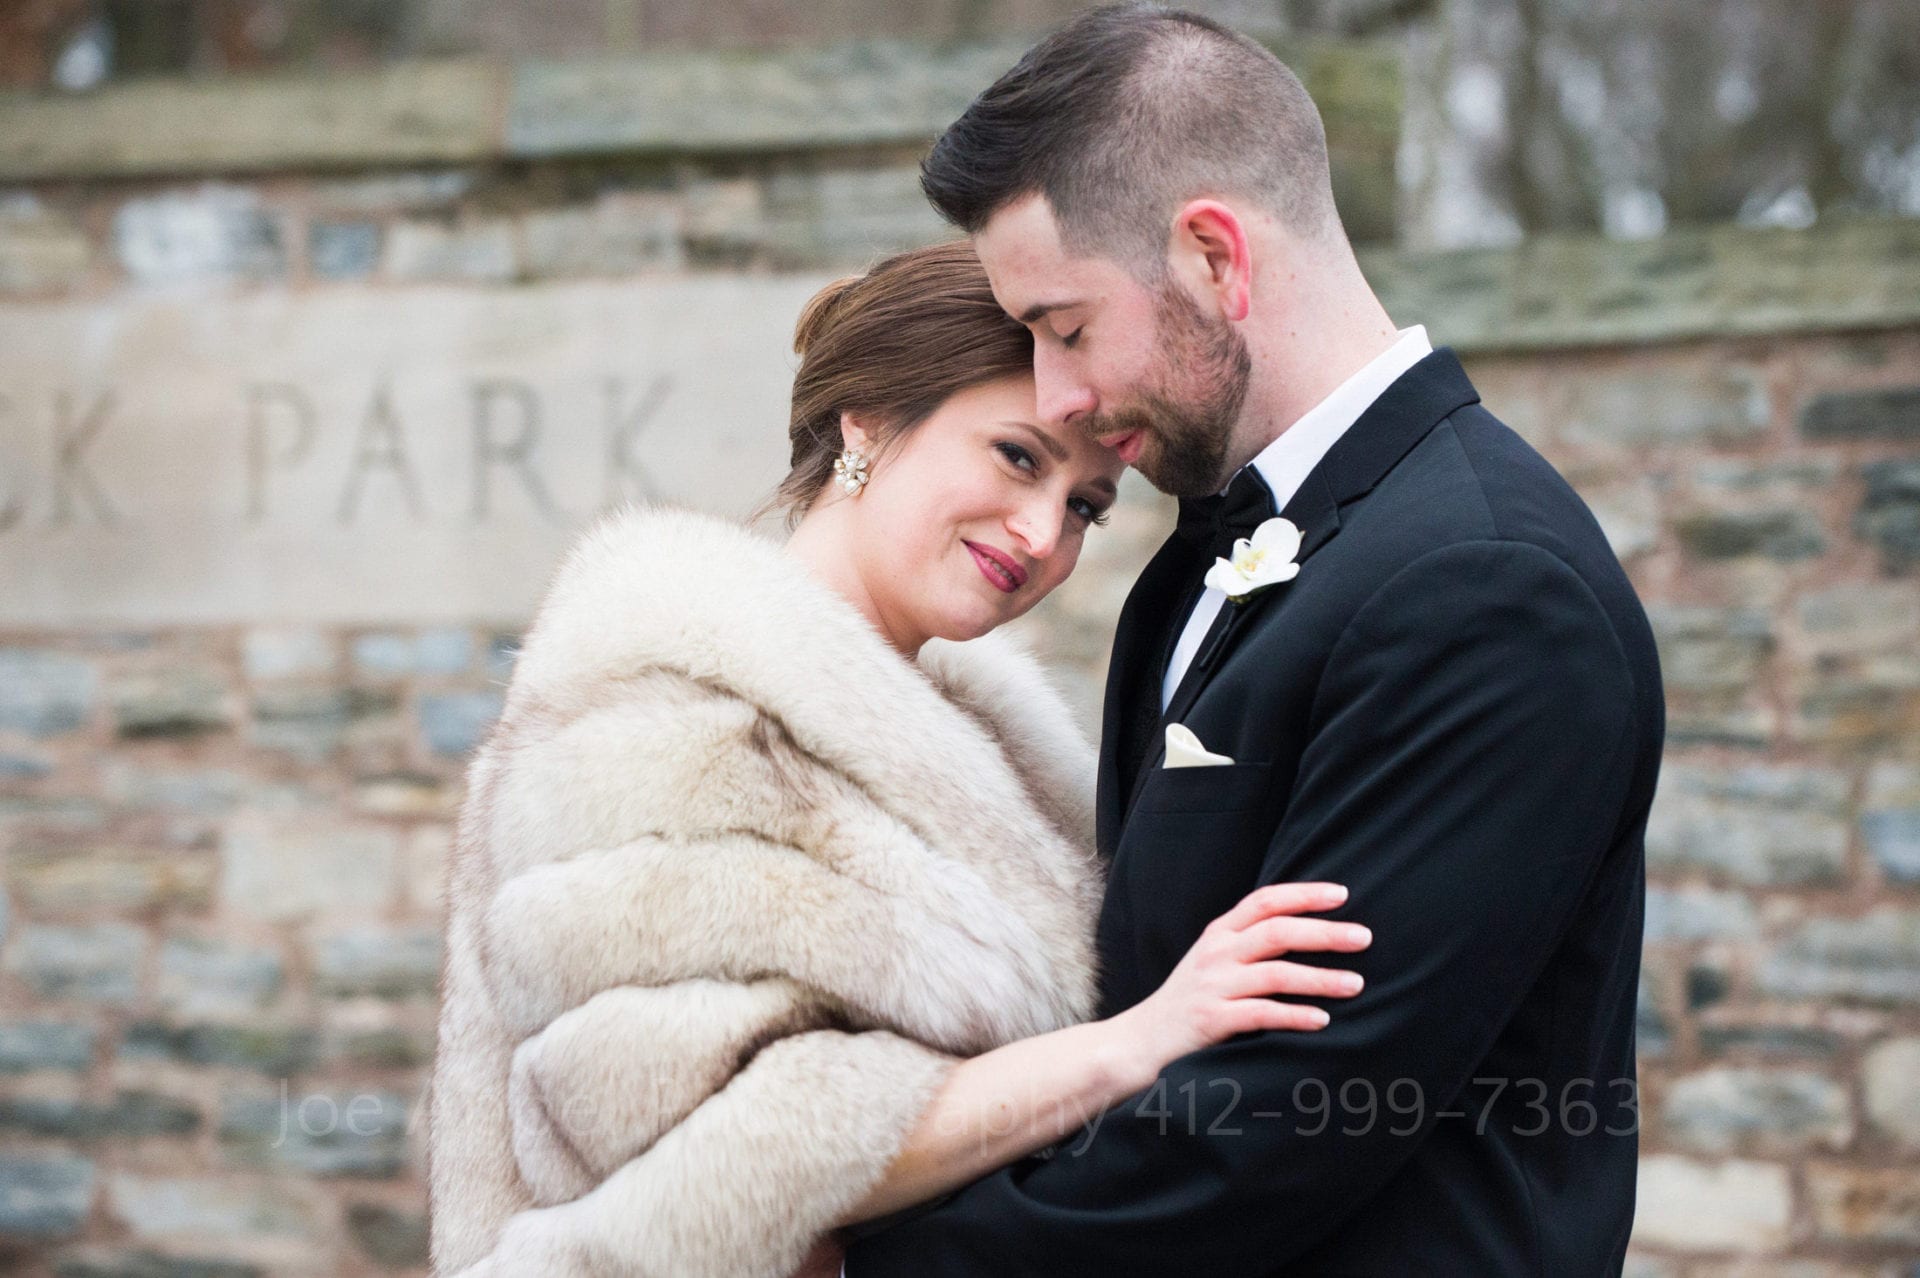 A young couple embraces in front of a stone wall. She wears a fur stole and looks at the camera while leaning into his chest. He wears a black tuxedo and has his eyes closed as his forehead touches hers.